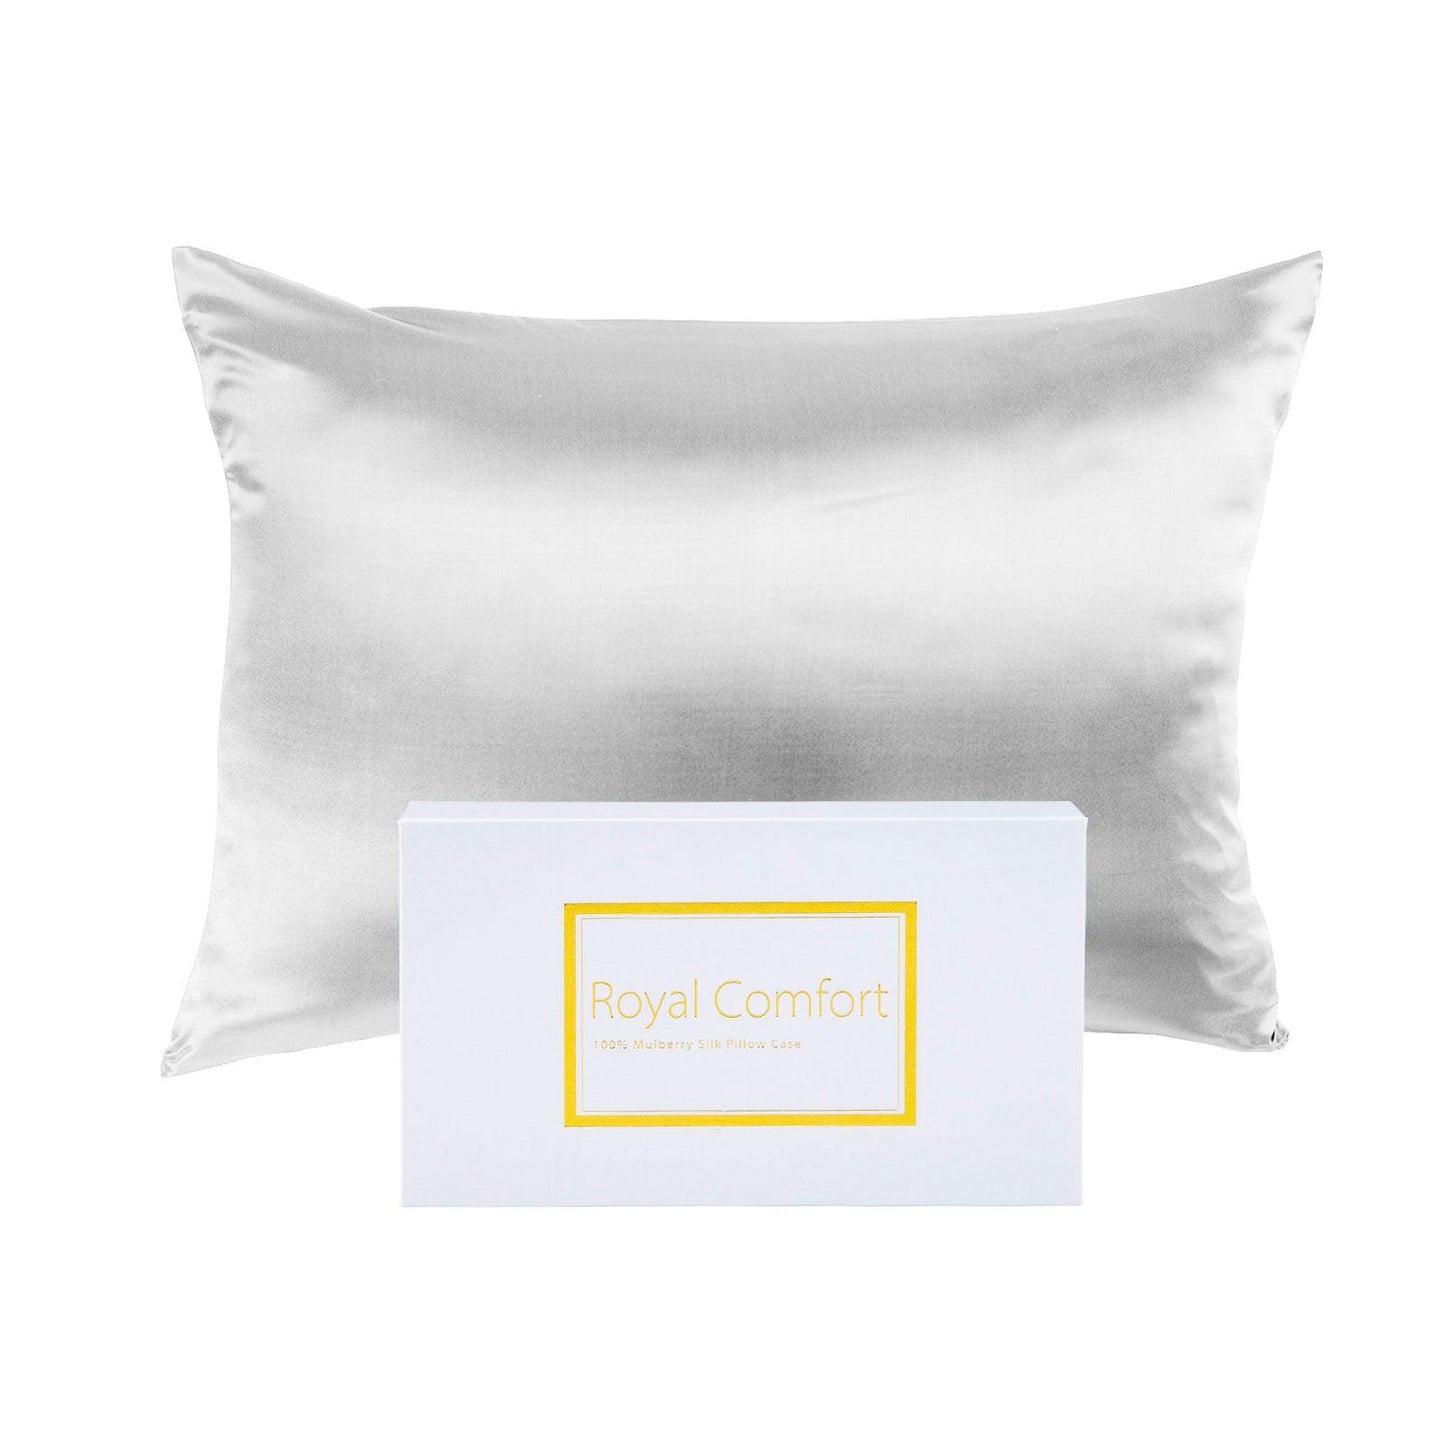 Royal Comfort Mulberry Soft Silk Hypoallergenic Pillowcase Twin Pack 51 x 76cm - Silver